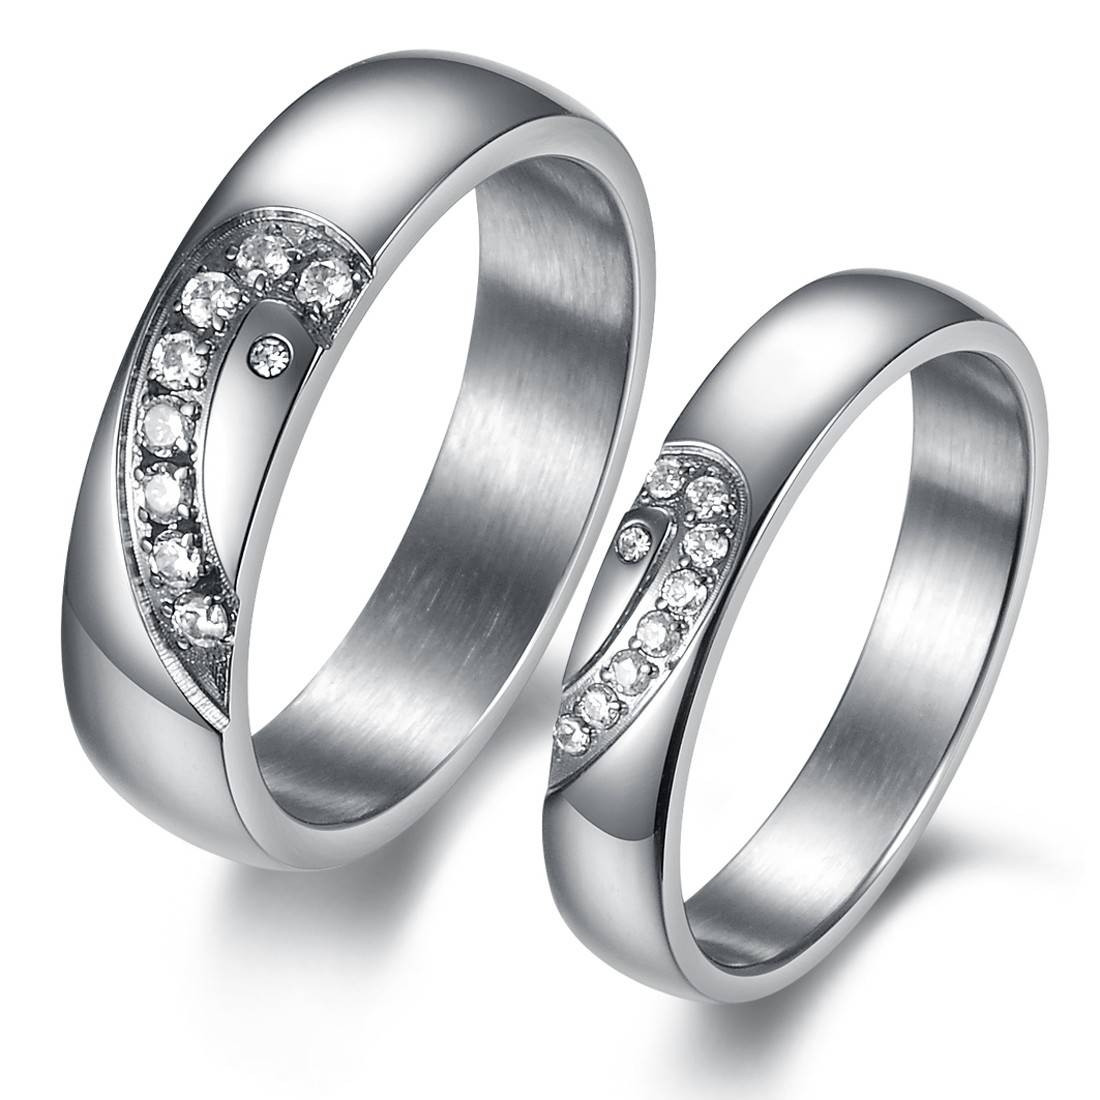 Wedding Bands Sets His And Her Matching
 15 Inspirations of Matching Wedding Bands Sets For His And Her